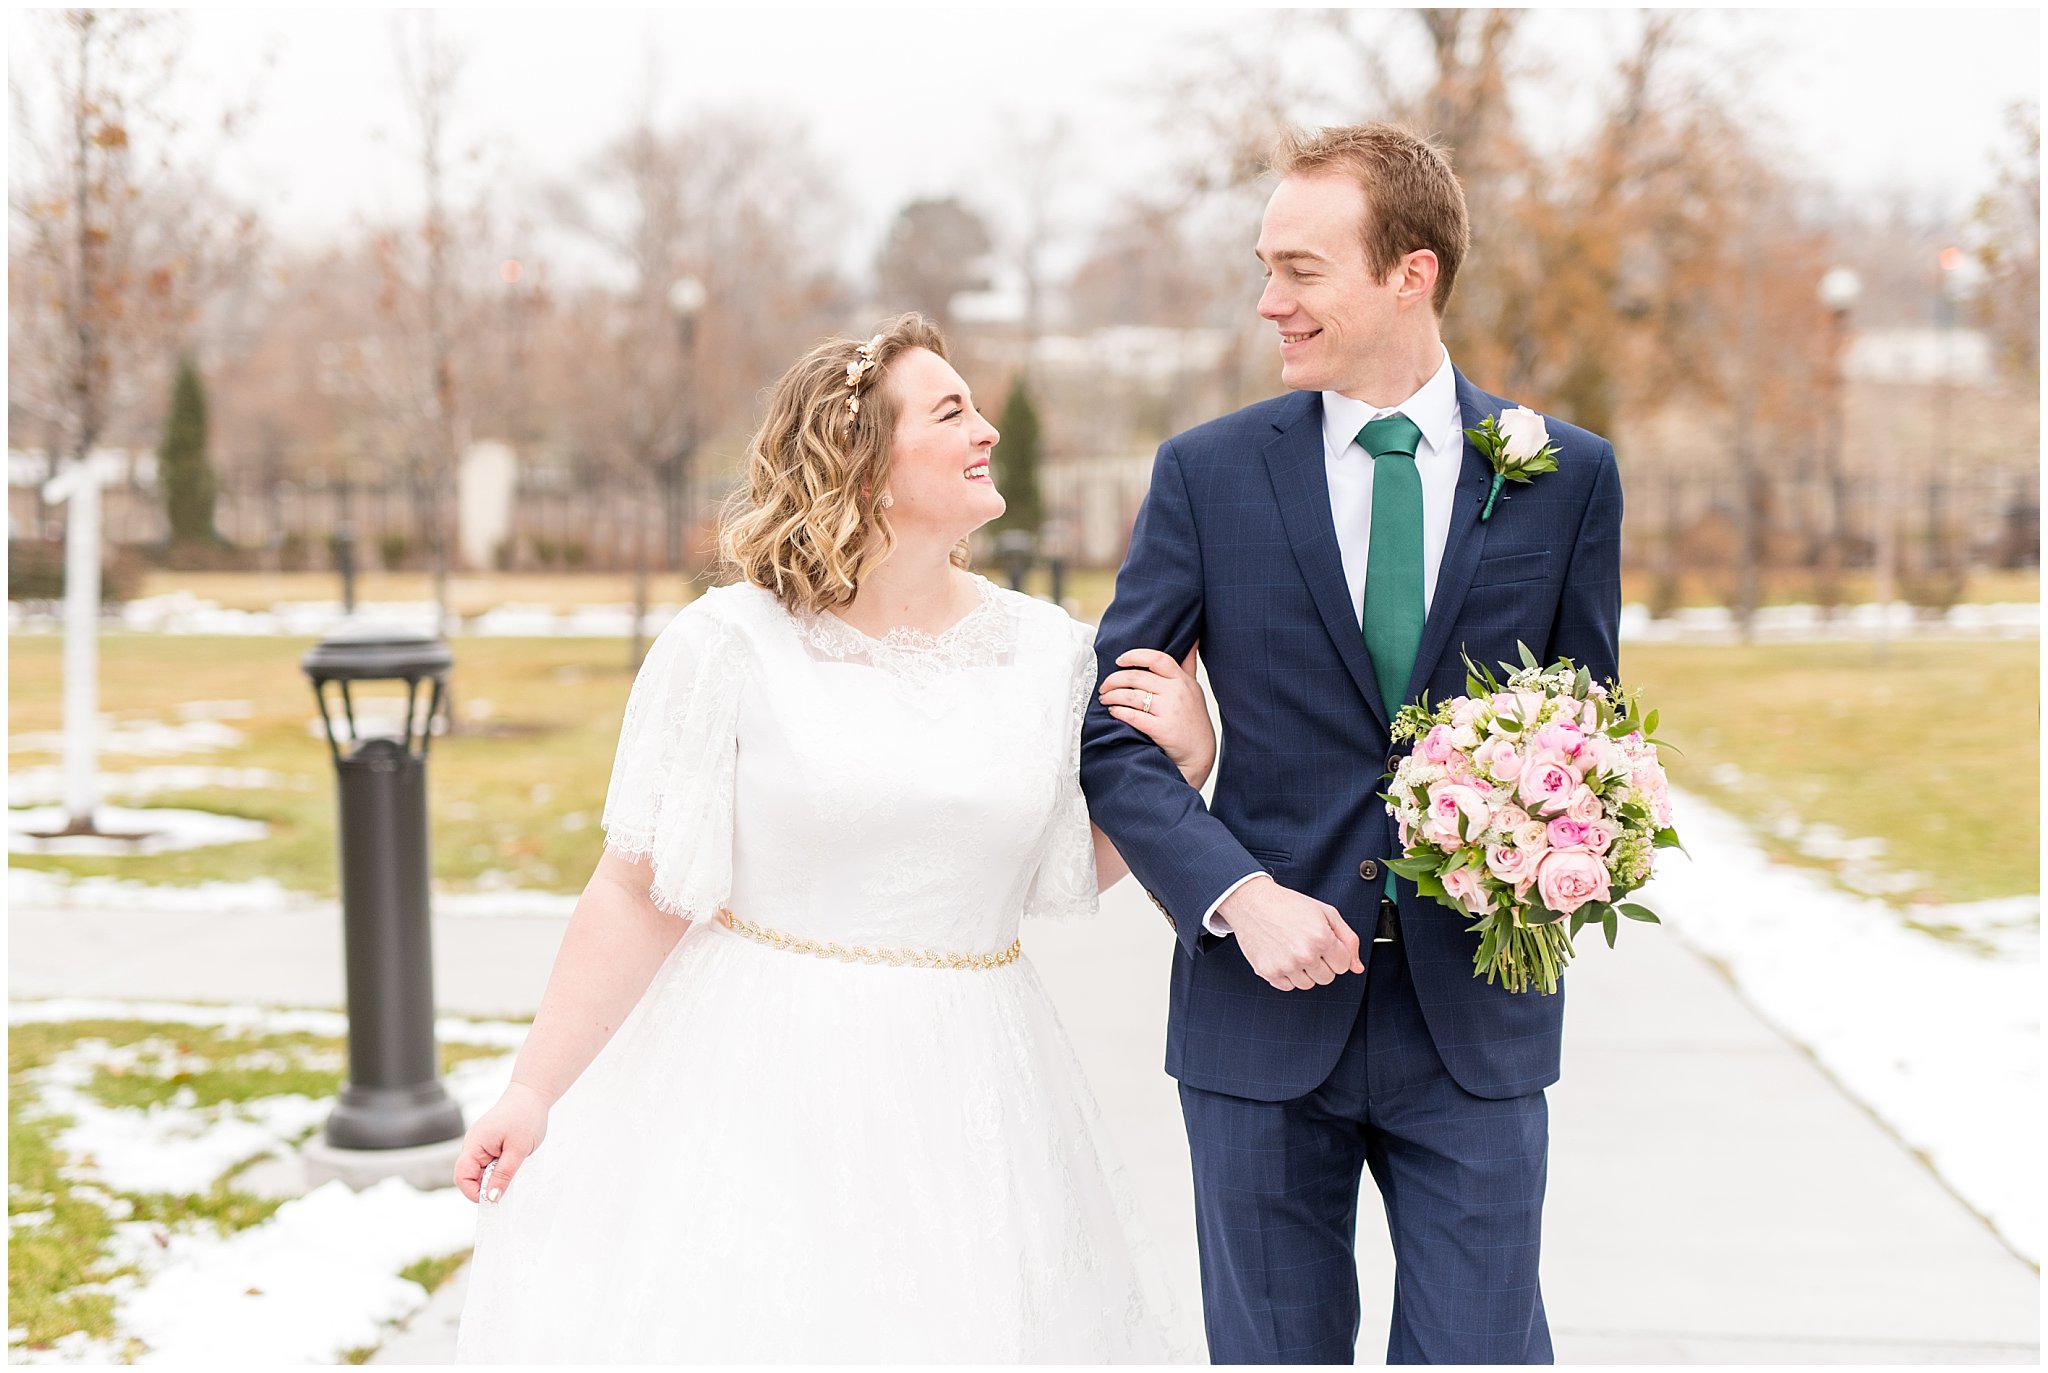 Bride and groom walking and smiling | Ogden Temple Winter Wedding | Emerald Green and Pink Wedding | Jessie and Dallin Photography